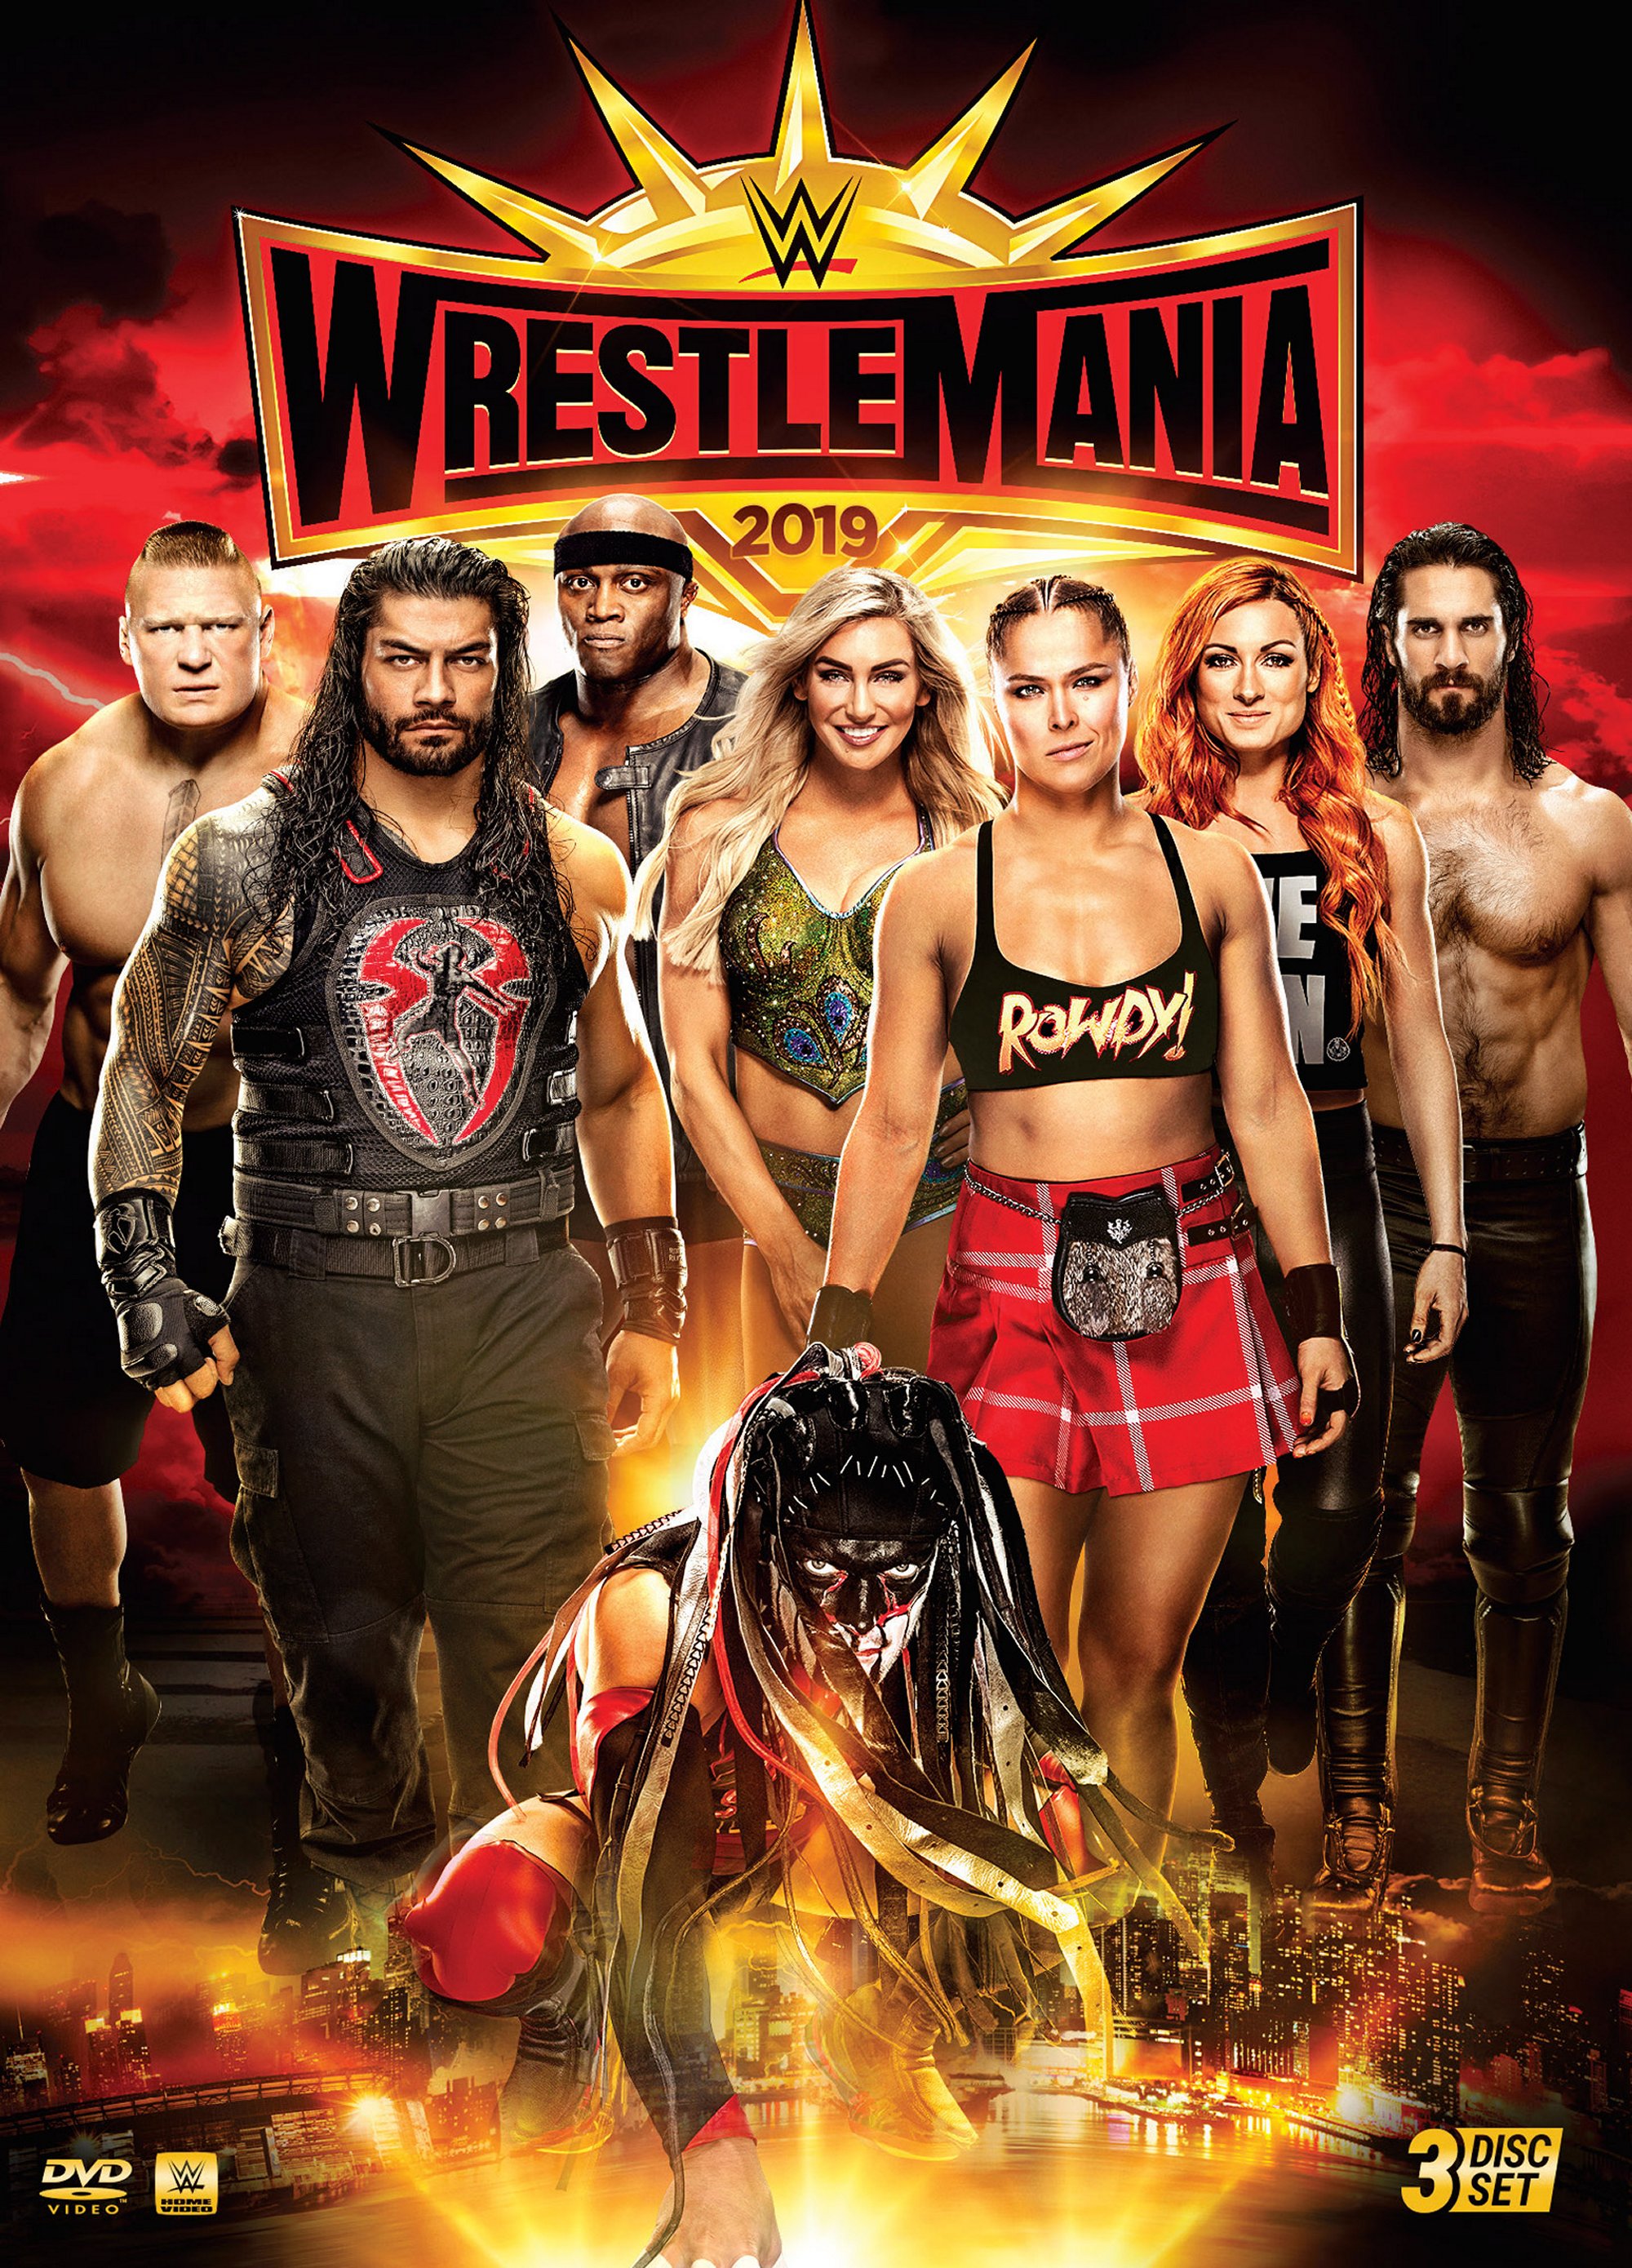 WWE Champions 2019 Wrestlemania 35 Roster Foil cards BUY 3 GET 1 FREE 